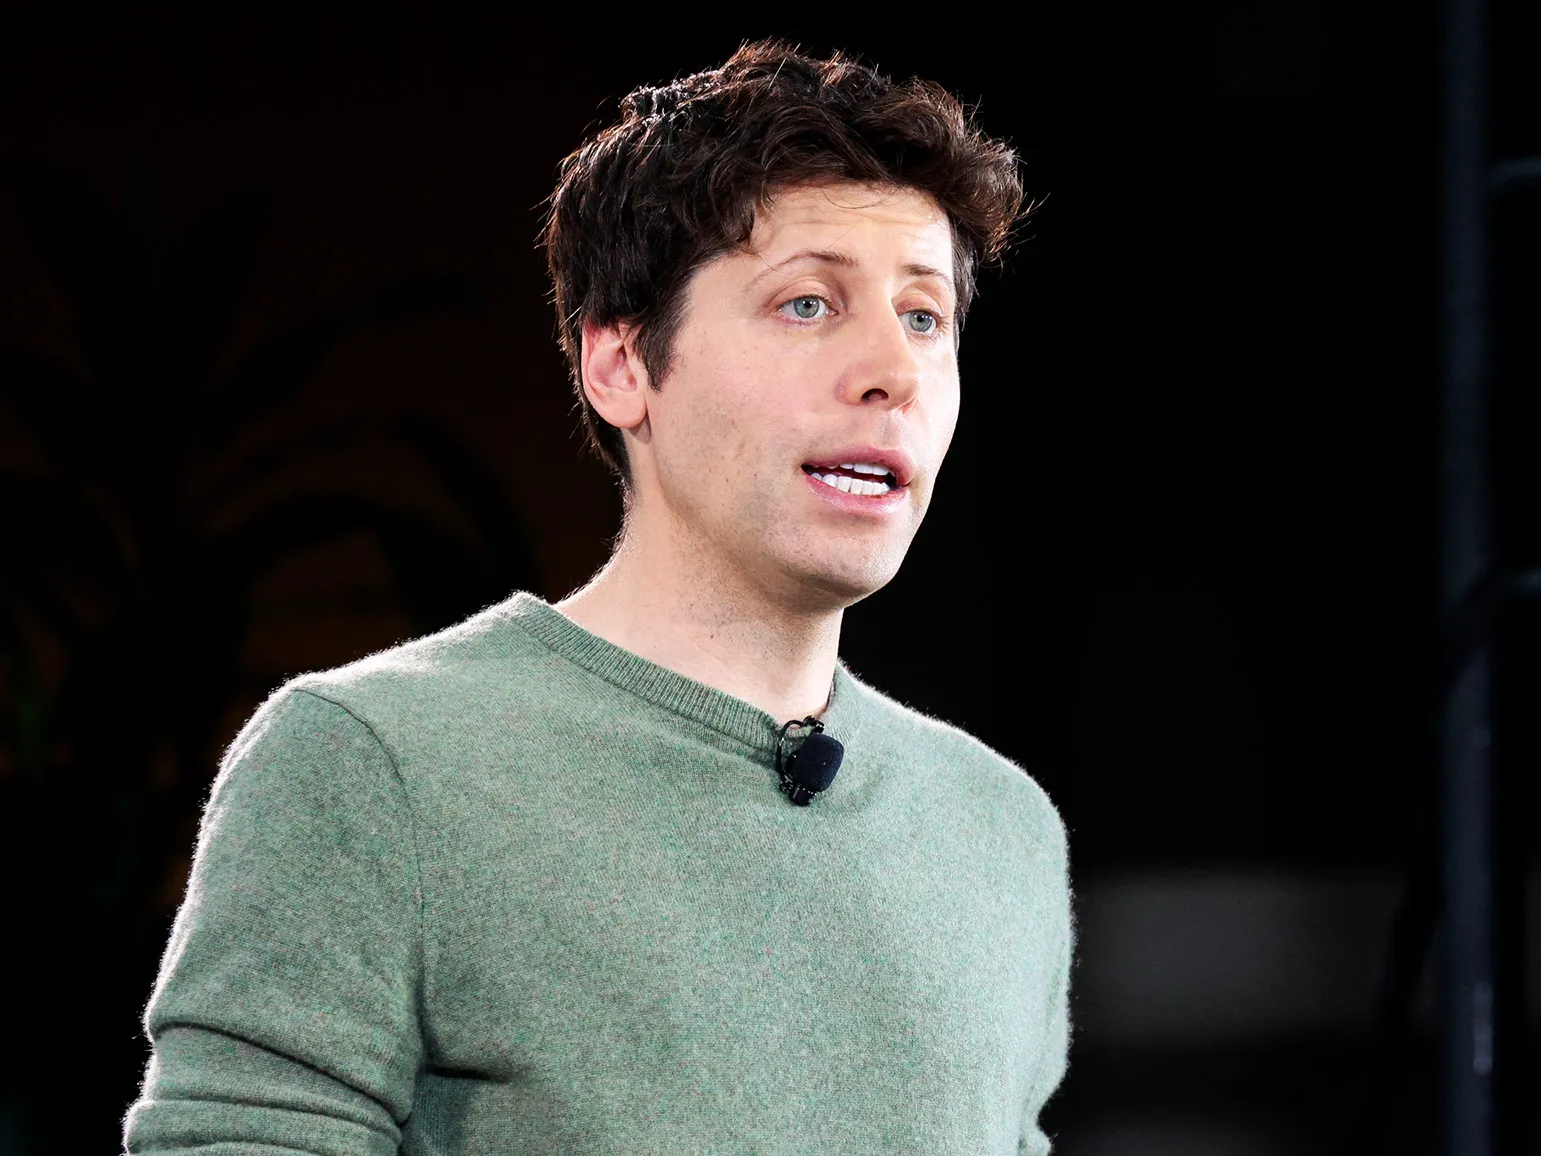 Sam Altman’s Firing From OpenAI: A Timeline And The Fallout